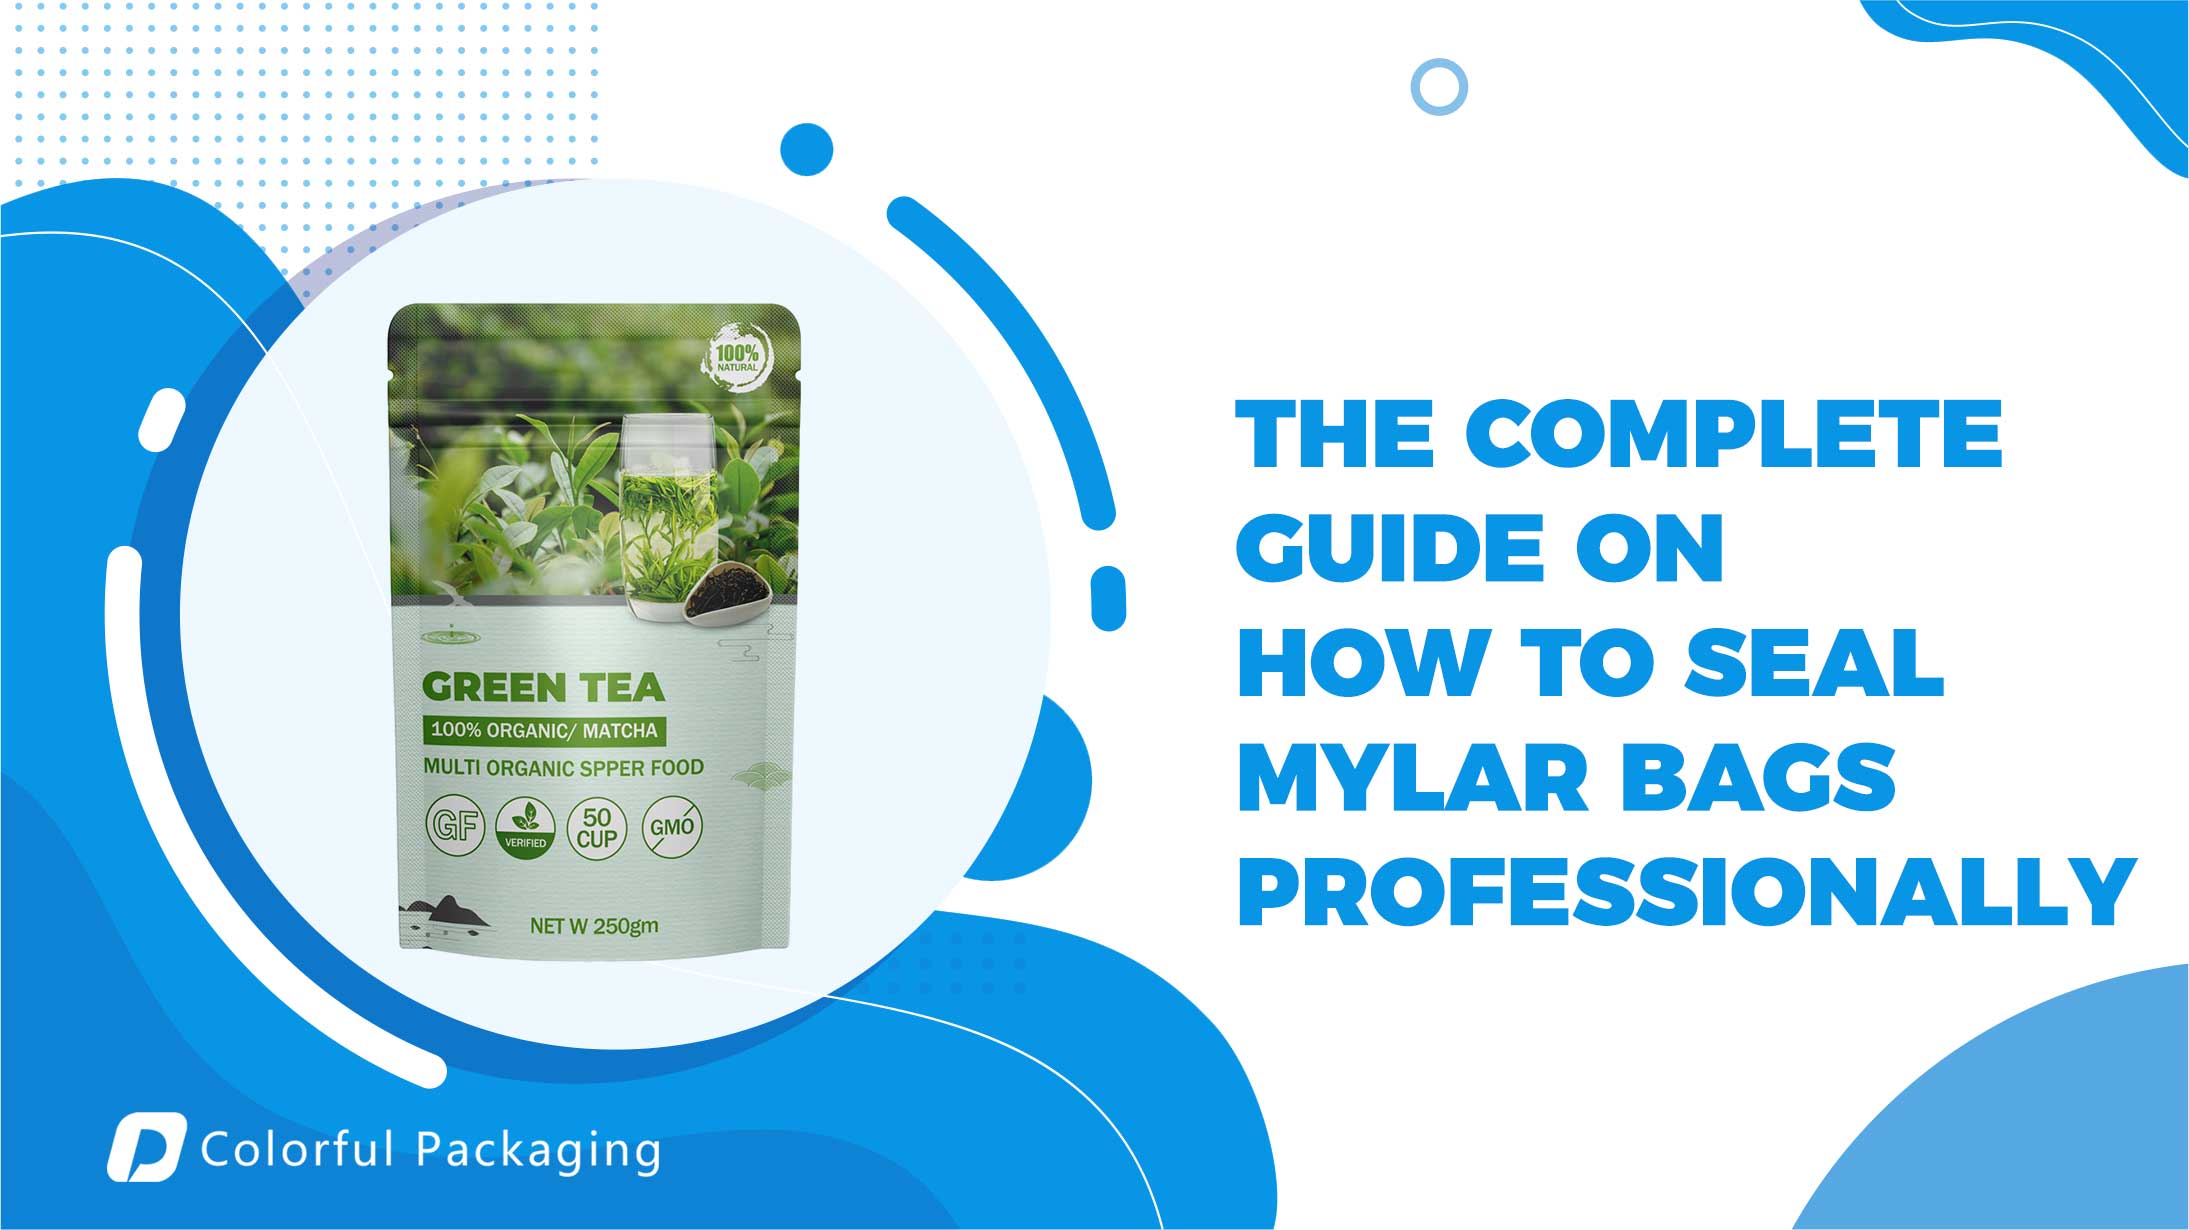 The Complete Guide on How to Seal Mylar Bags Professionally